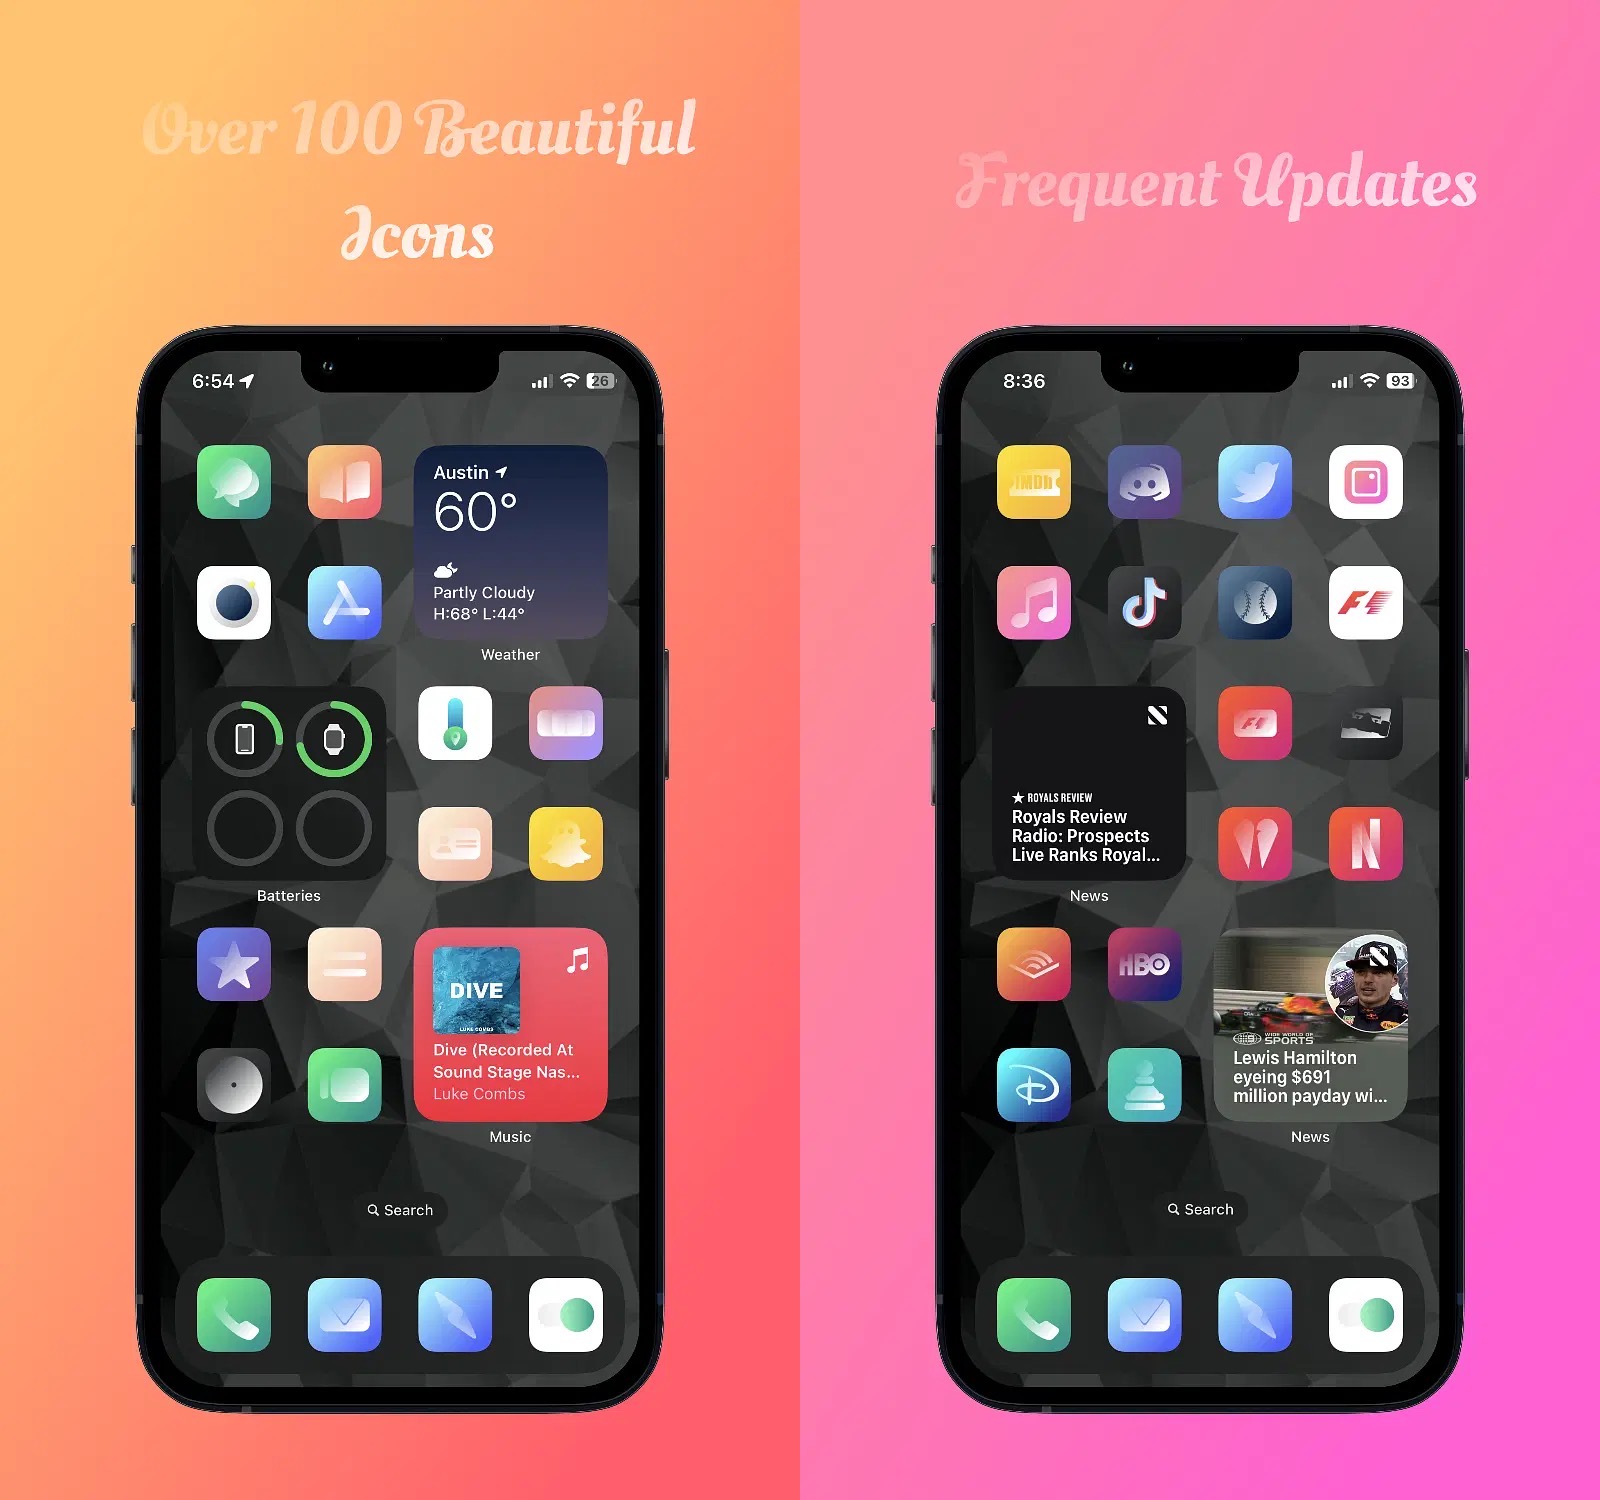 Vivacity is a vibrant new and free theme for iPhones and iPads